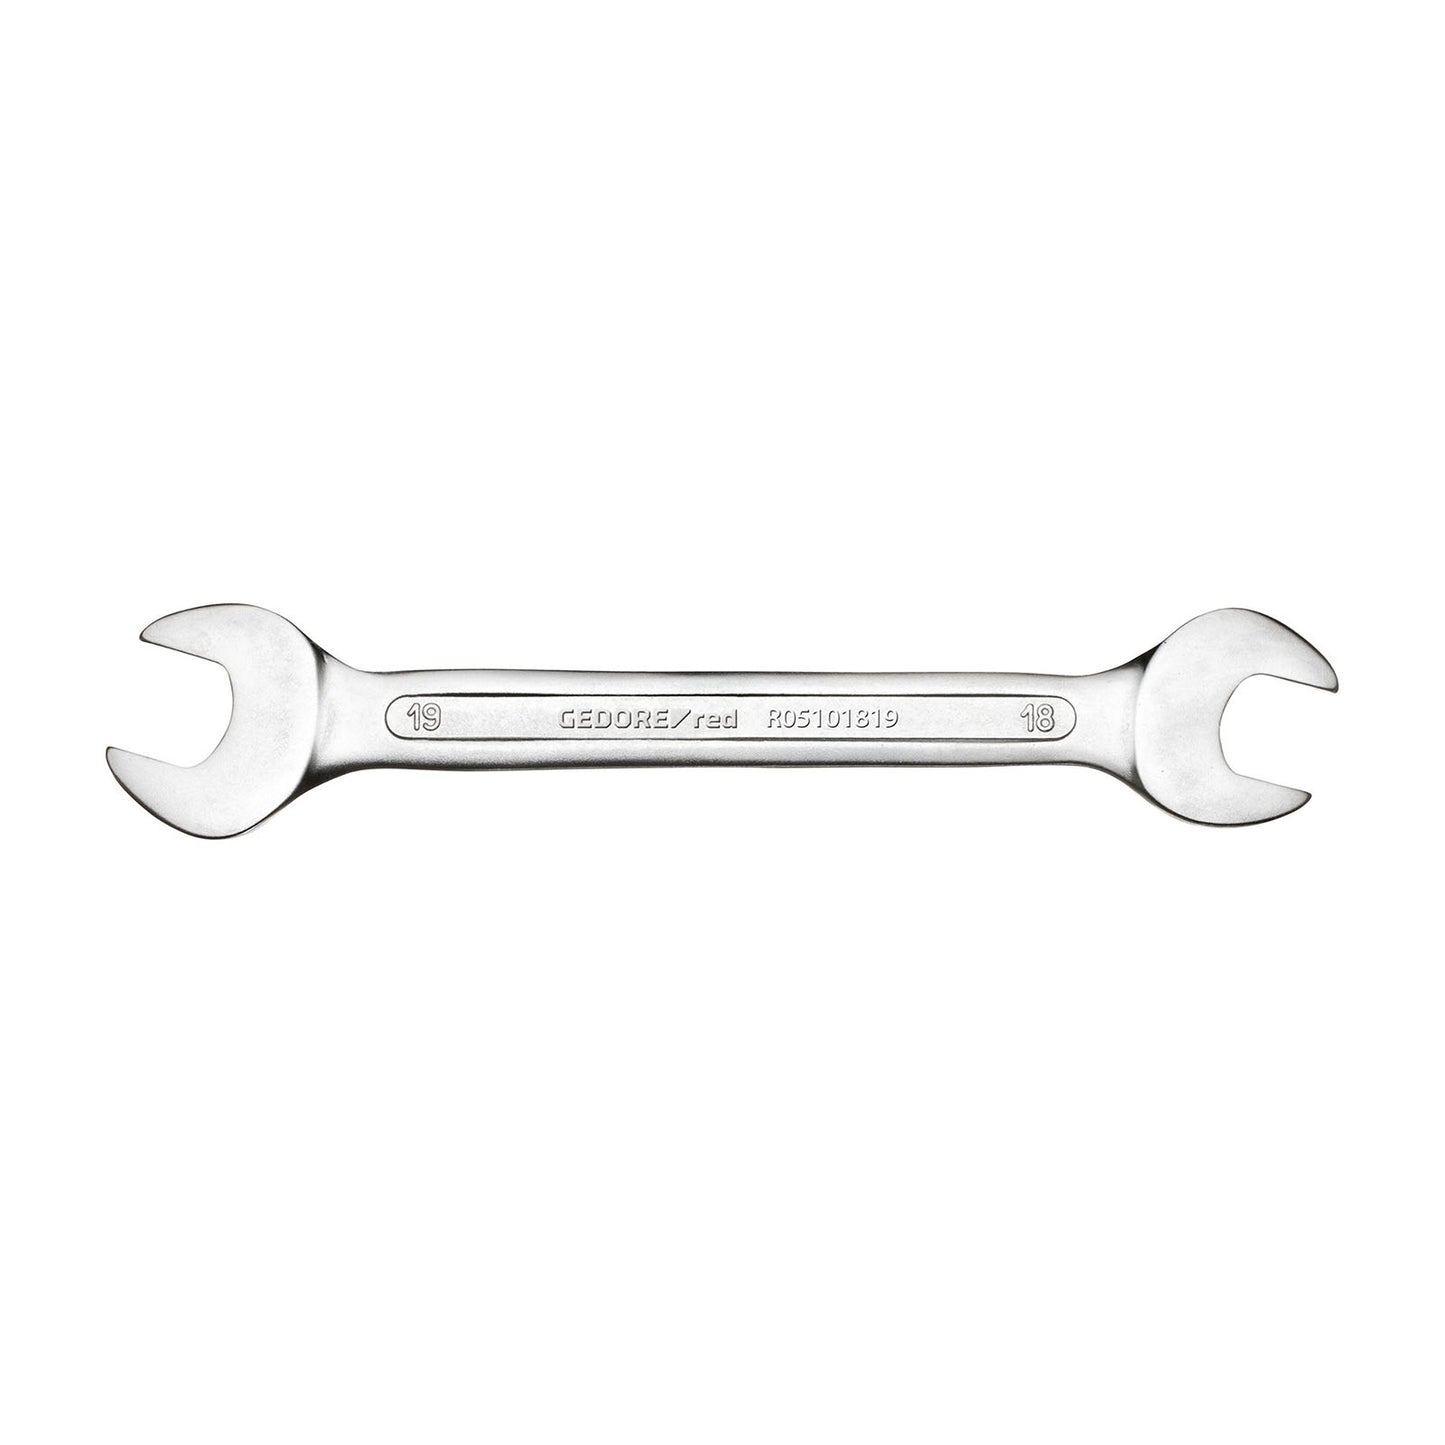 GEDORE red R05101011 - Double open end wrench 10x11 mm L=157 mm (3300933)